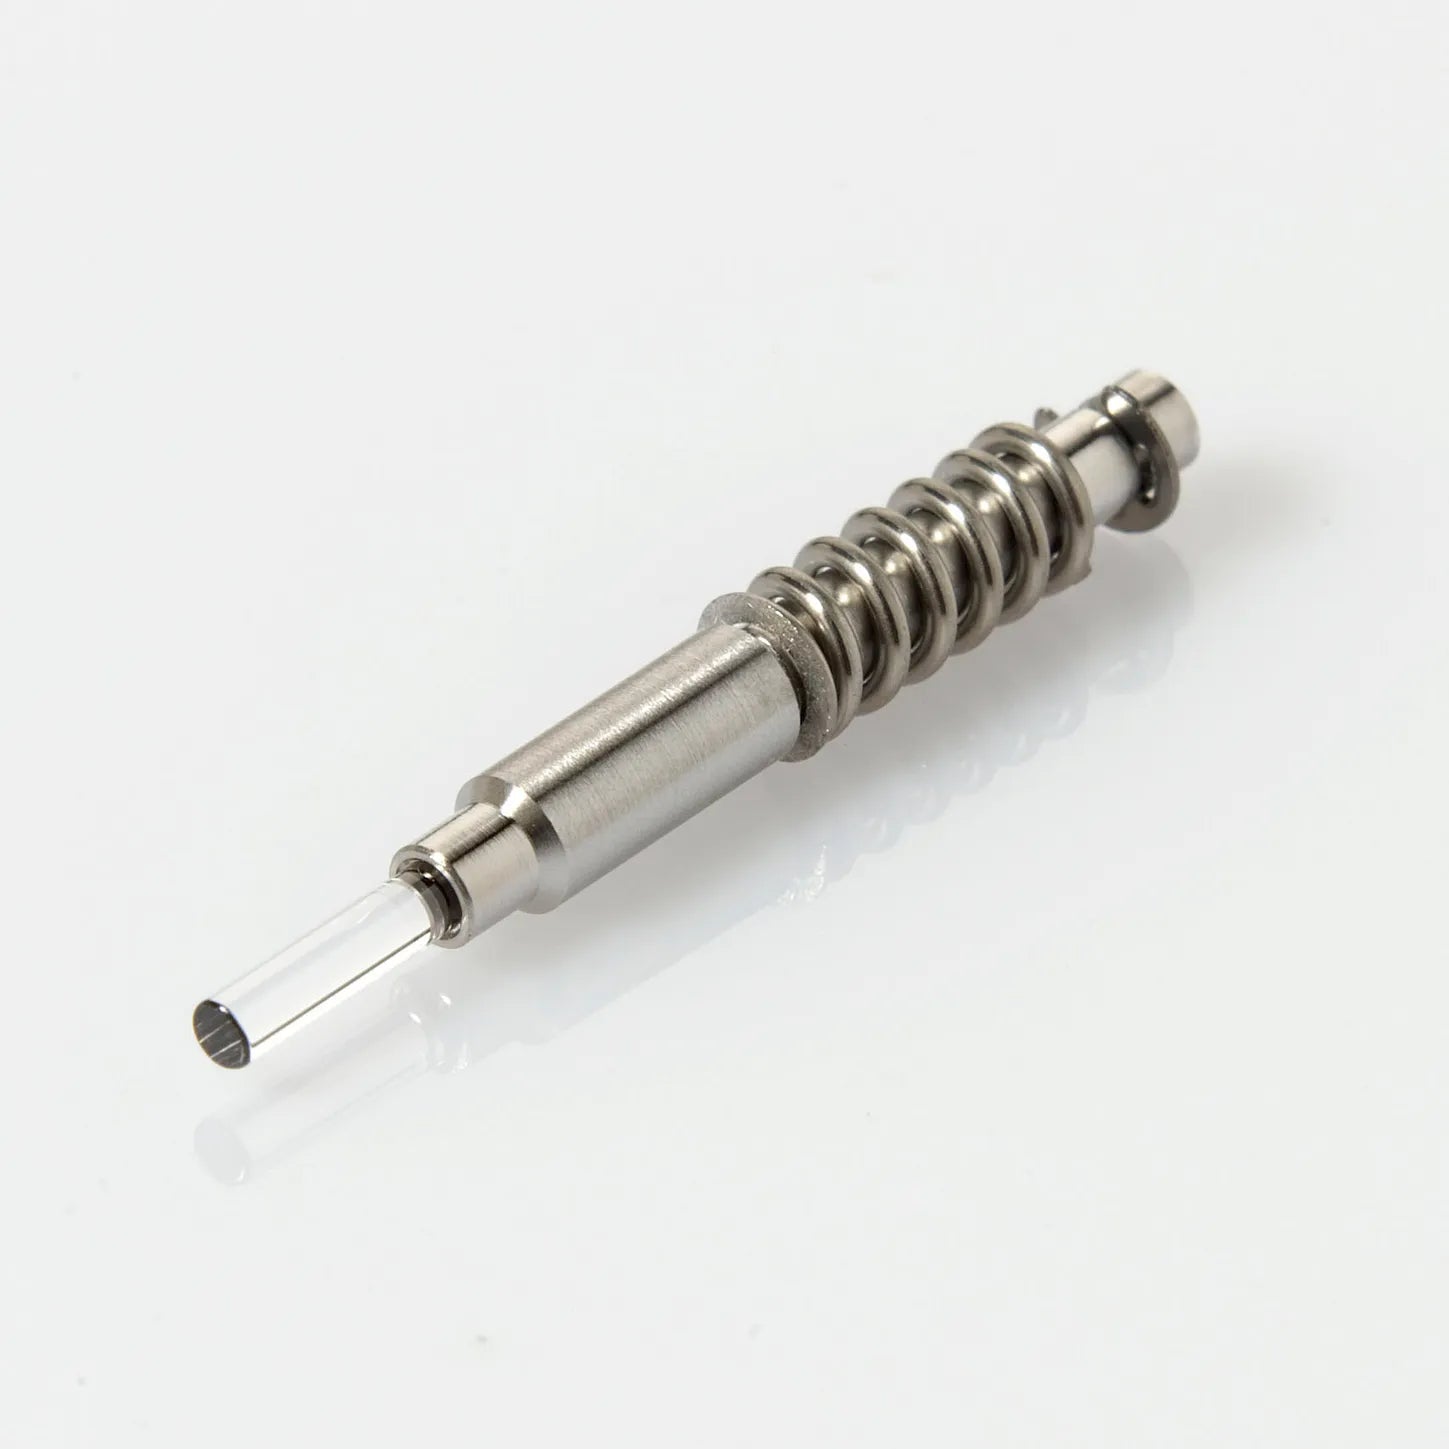 Sapphire Plunger, Comparable to Shimadzu # 228-35601-93, Old# 228-34498-91, 228-35601-92